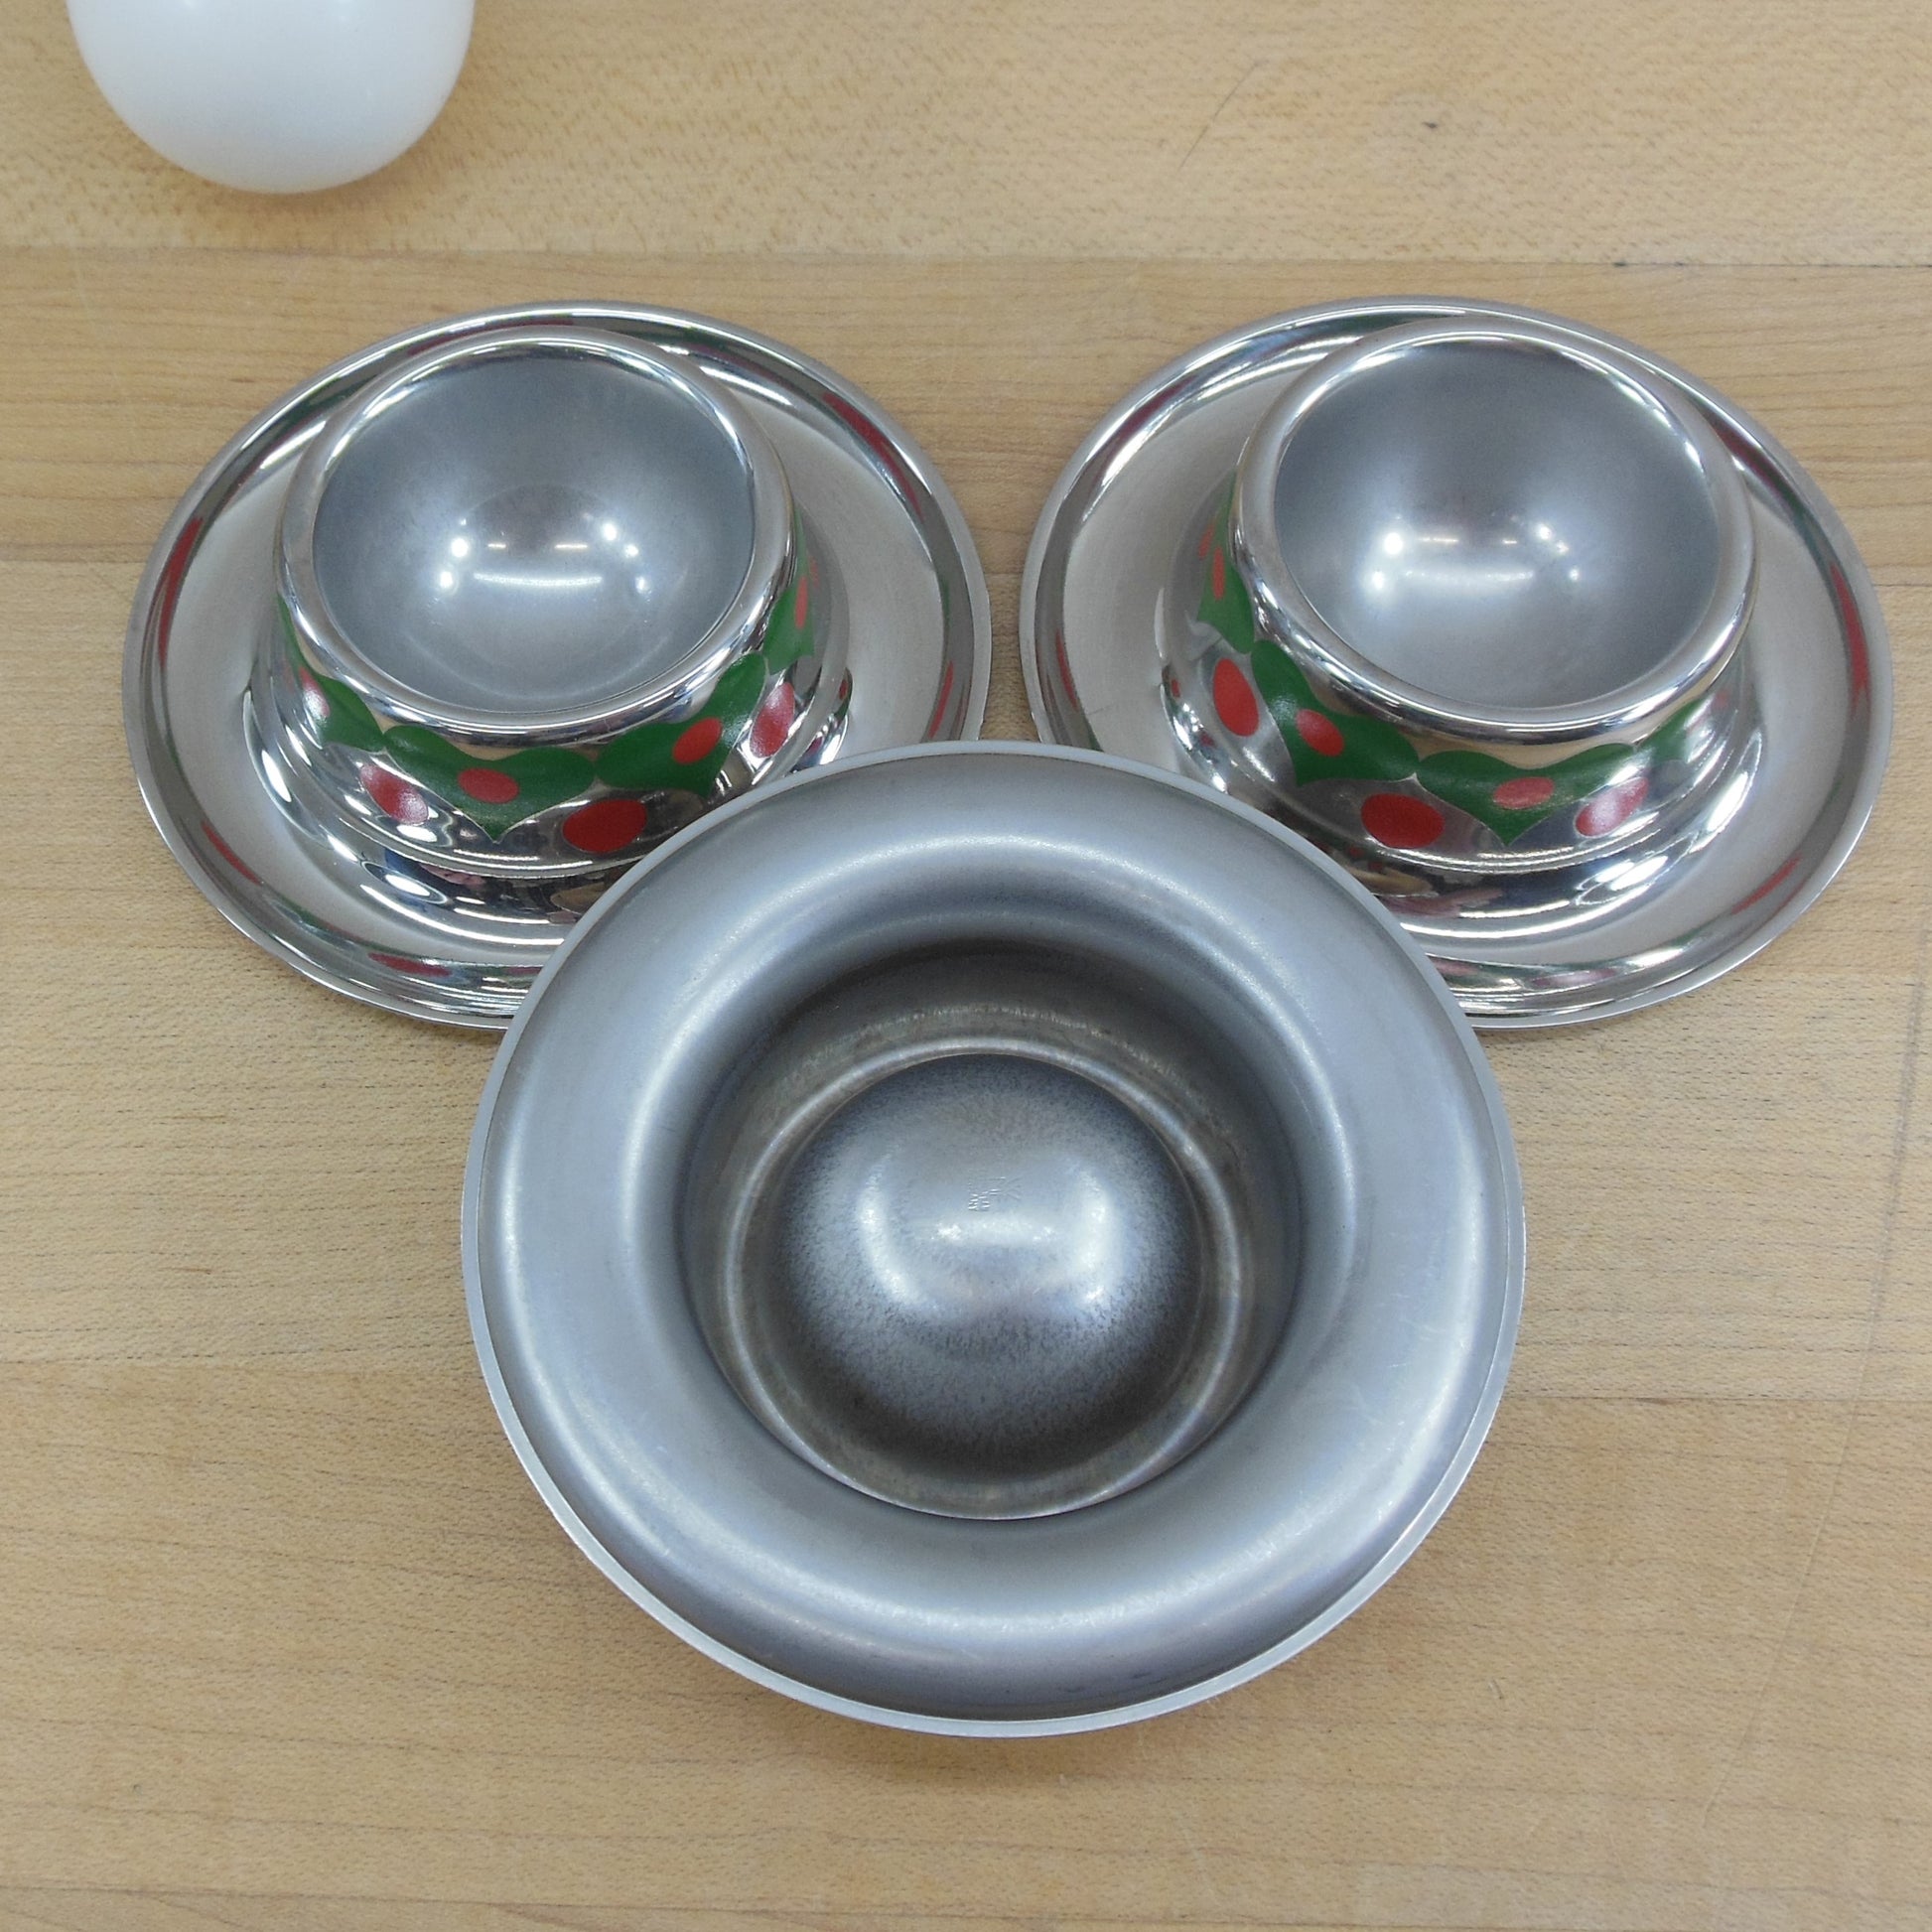 WMF Germany Cromargan Stainless Egg Cups Green Red Hearts - 3 Set Used